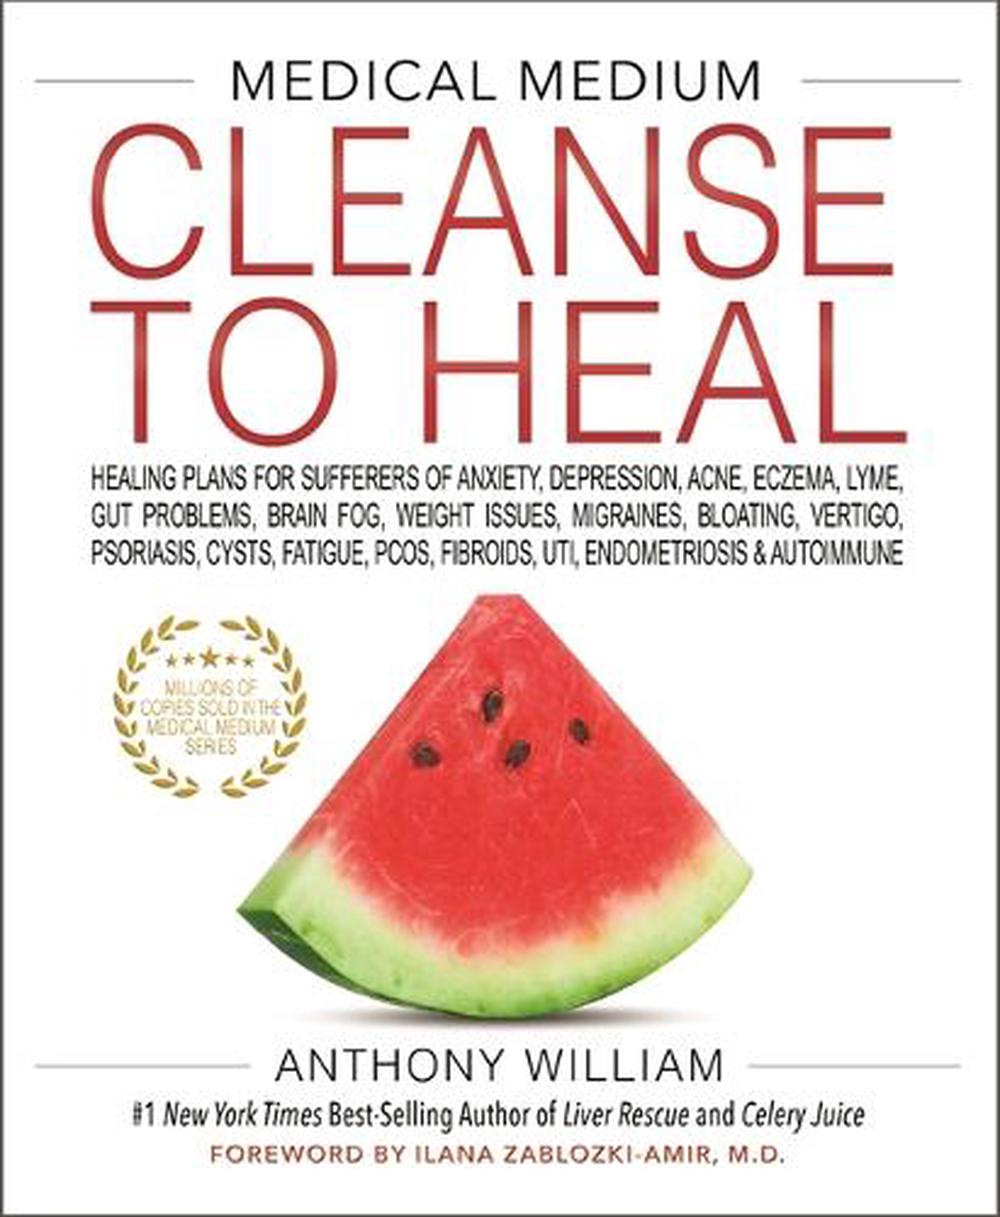 Medical　by　Anthony　Medium　Cleanse　to　Heal　William,　at　Hardcover,　9781401958459　Buy　online　The　Nile